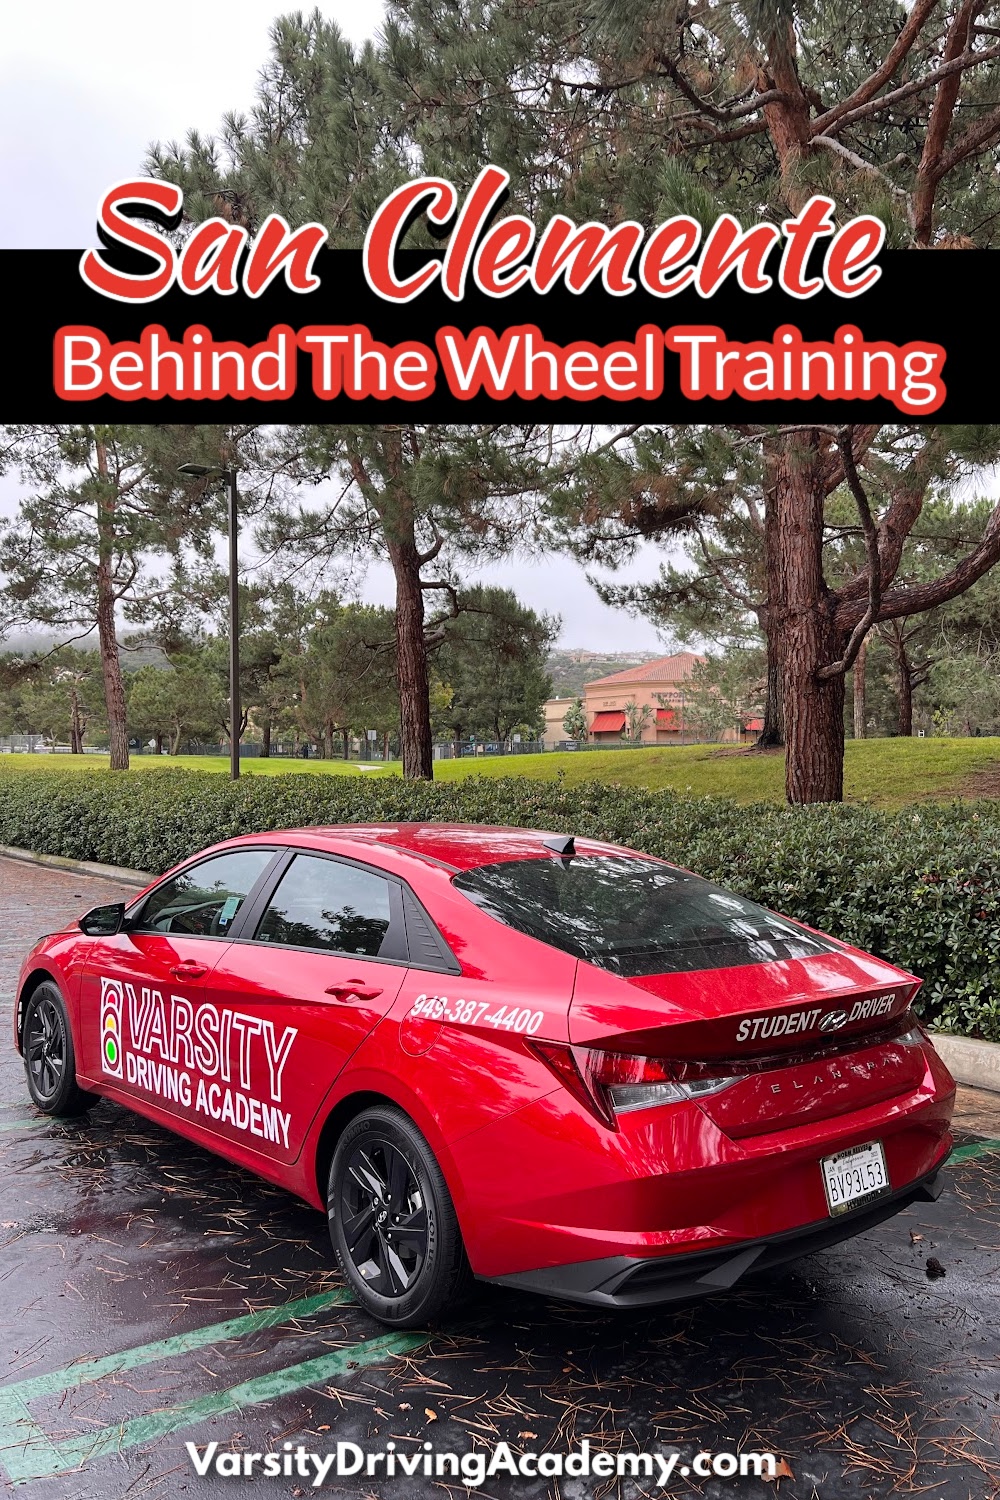 San Clemente behind the wheel training with Varsity Driving Academy will help you pass your DMV test. Call 949-387-4400 to choose the best drivers ed in San Clemente.